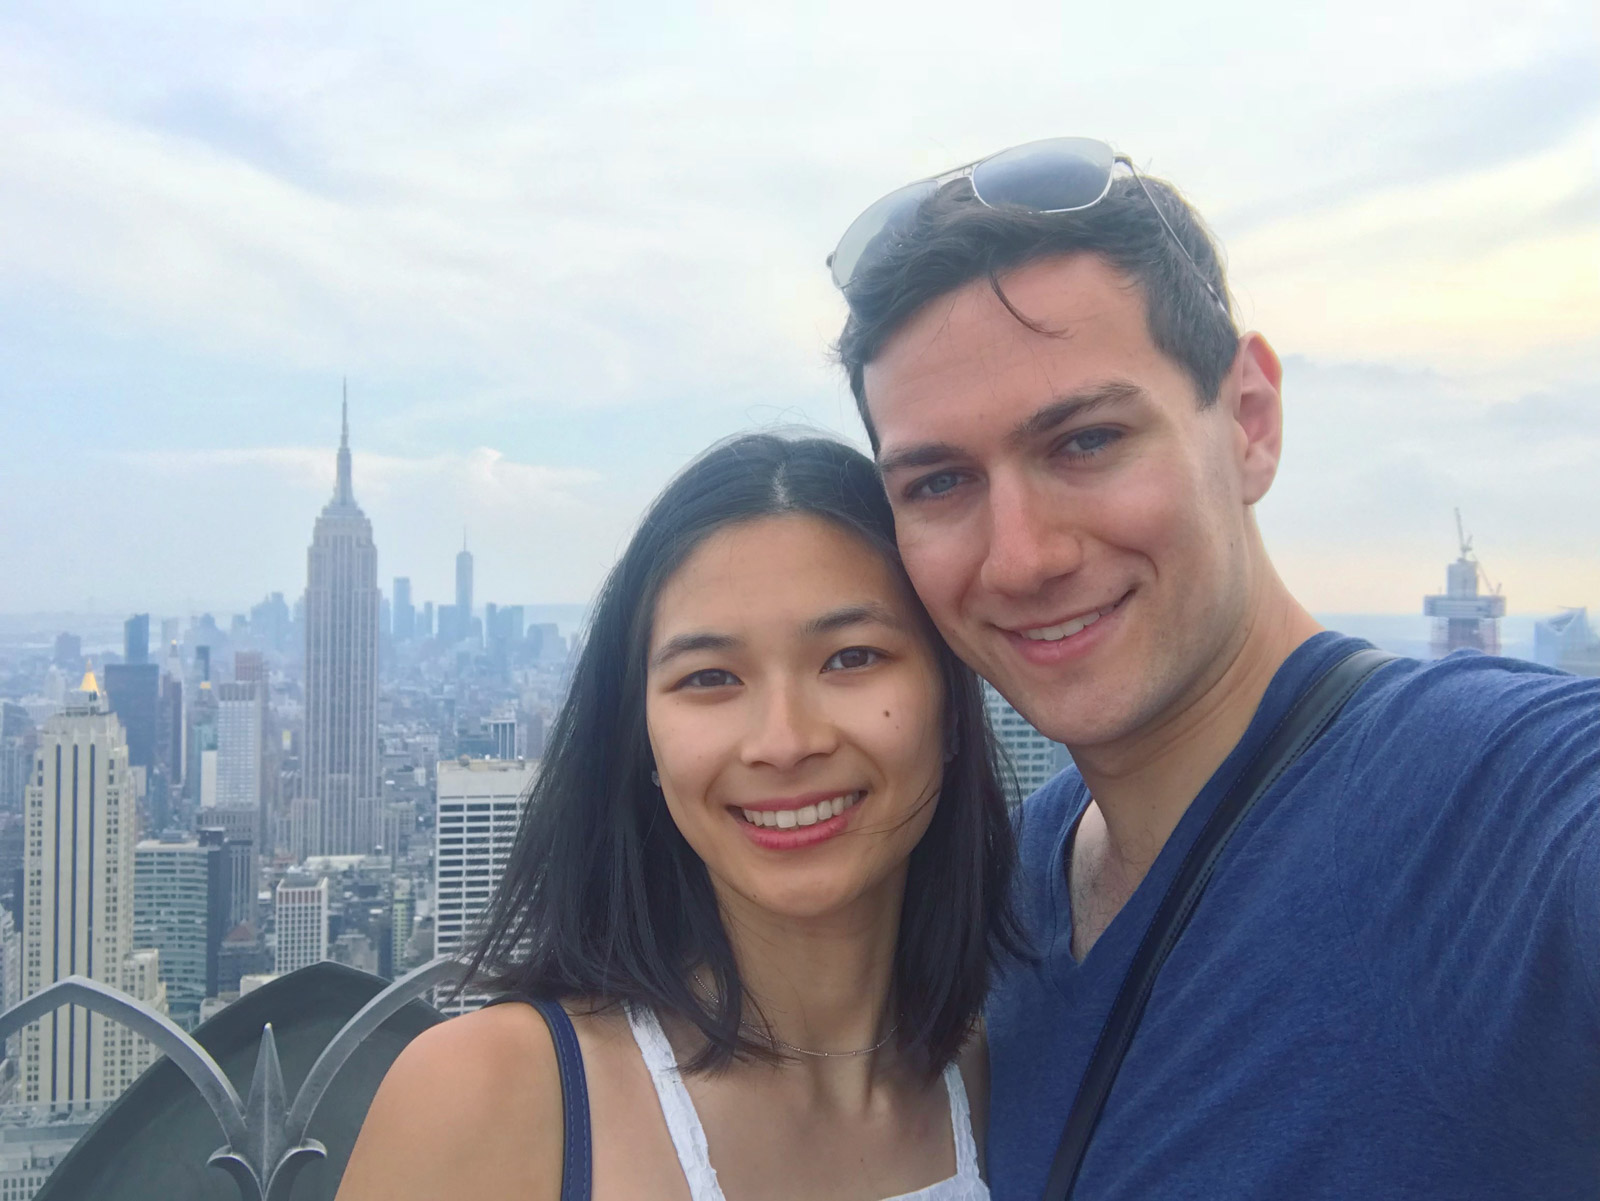 A selfie of a man and woman, smiling. The buildings of New York City are in the background.